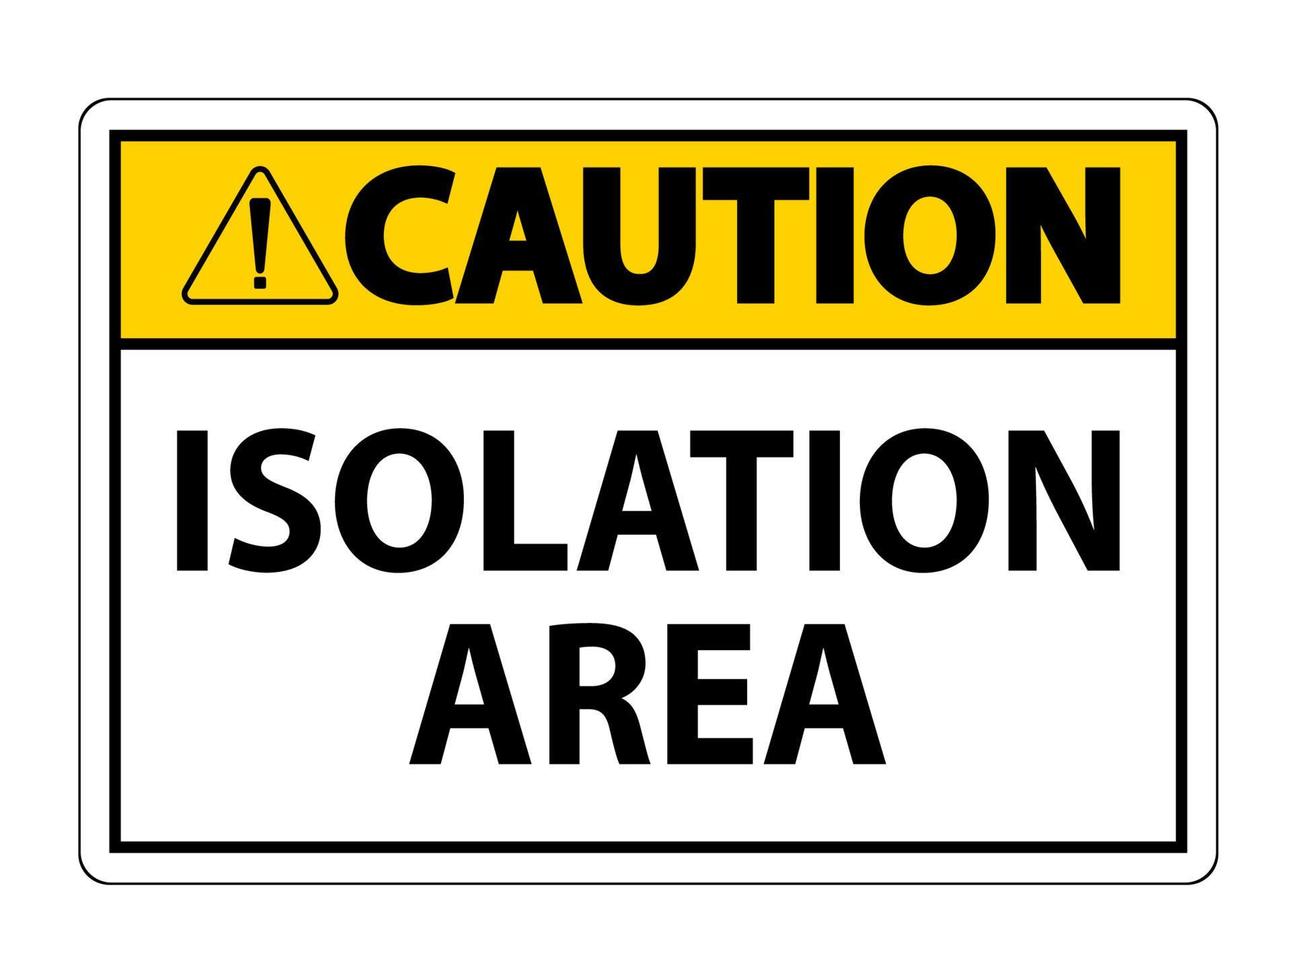 Caution Isolation Area Sign Isolate On White Background,Vector Illustration EPS.10 vector